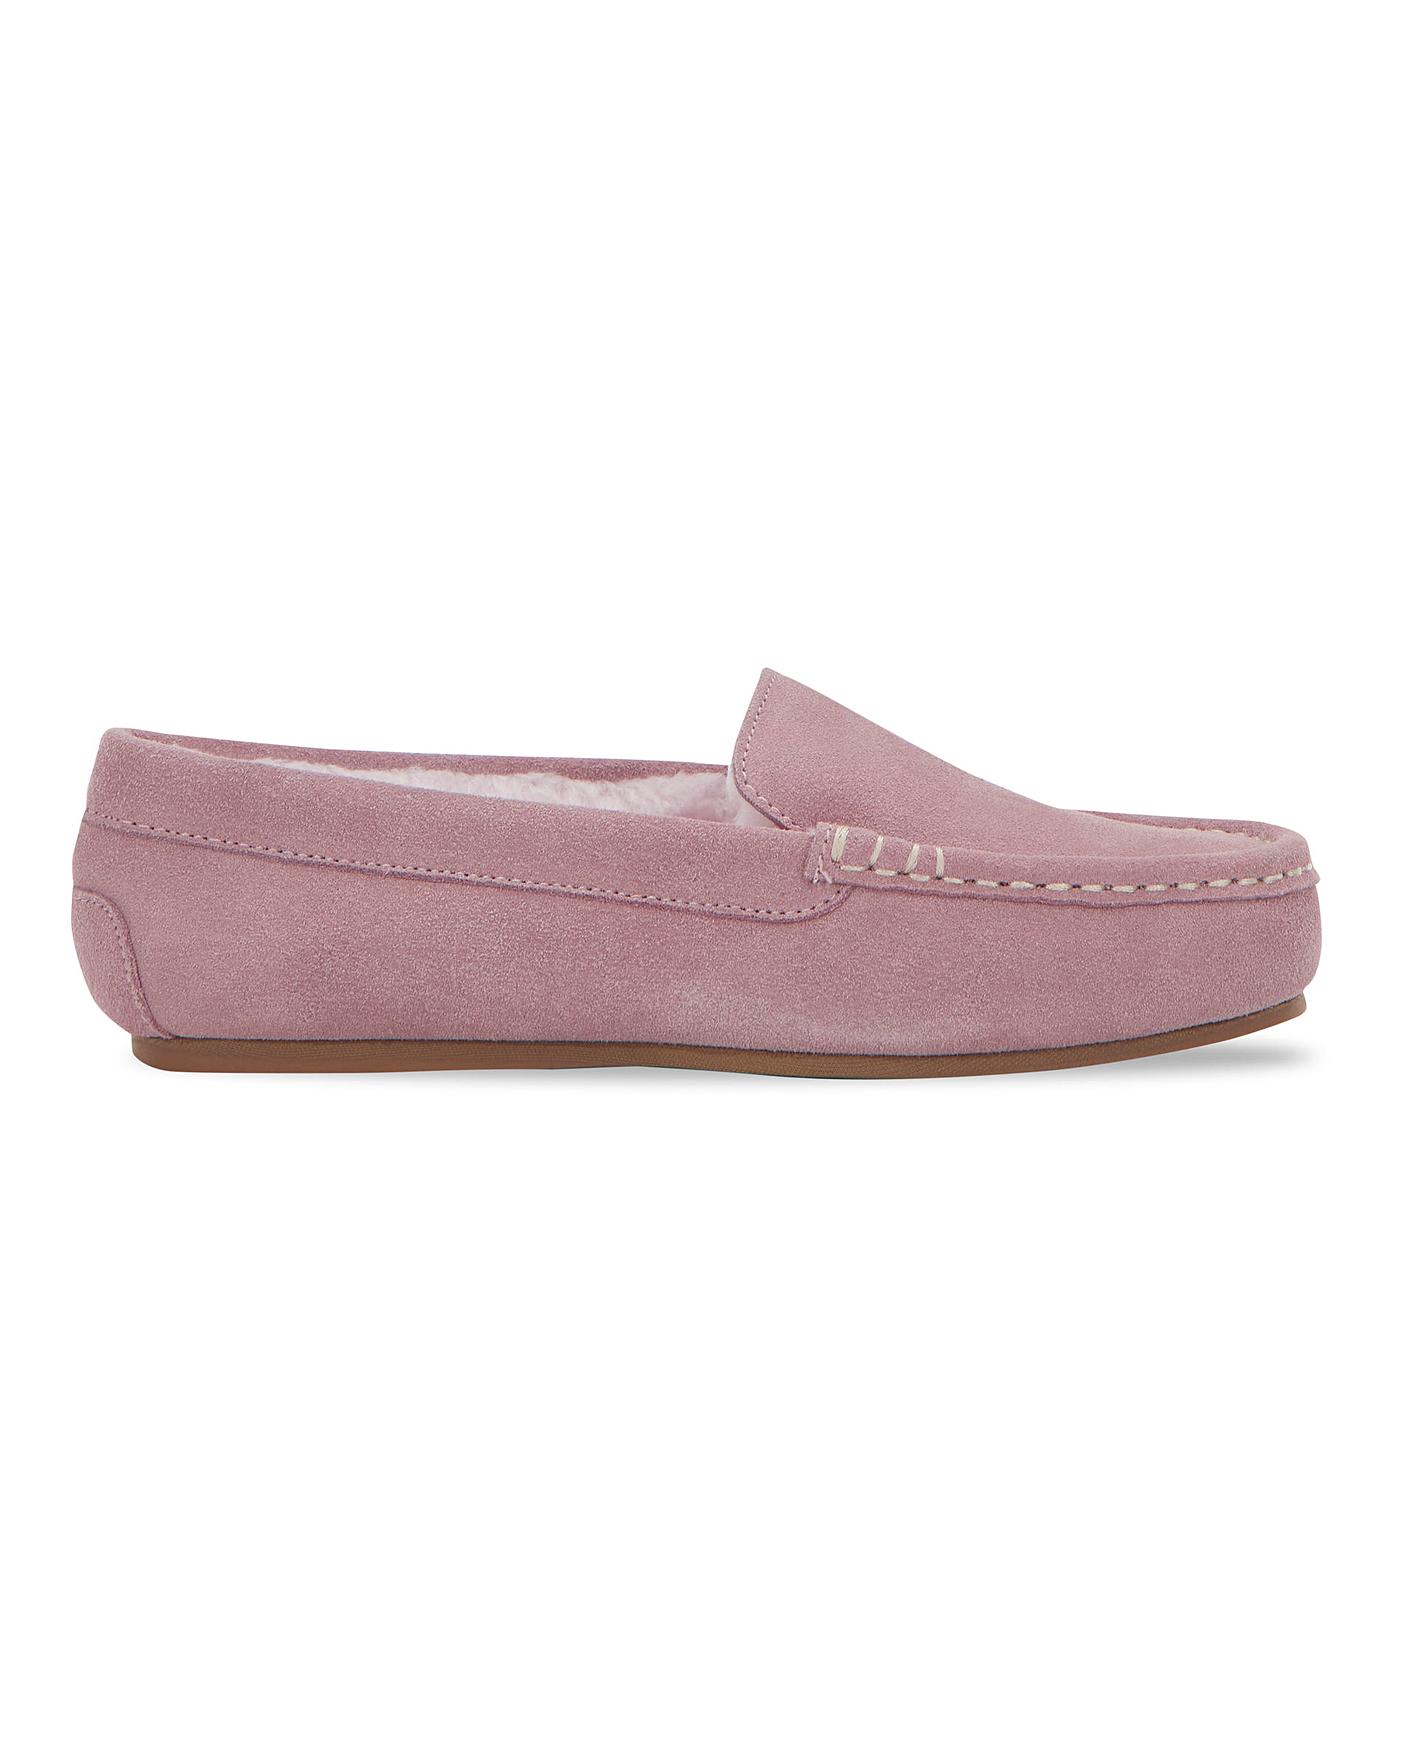 Classic Suede Moccasin Slipper EEE Fit | J D Williams